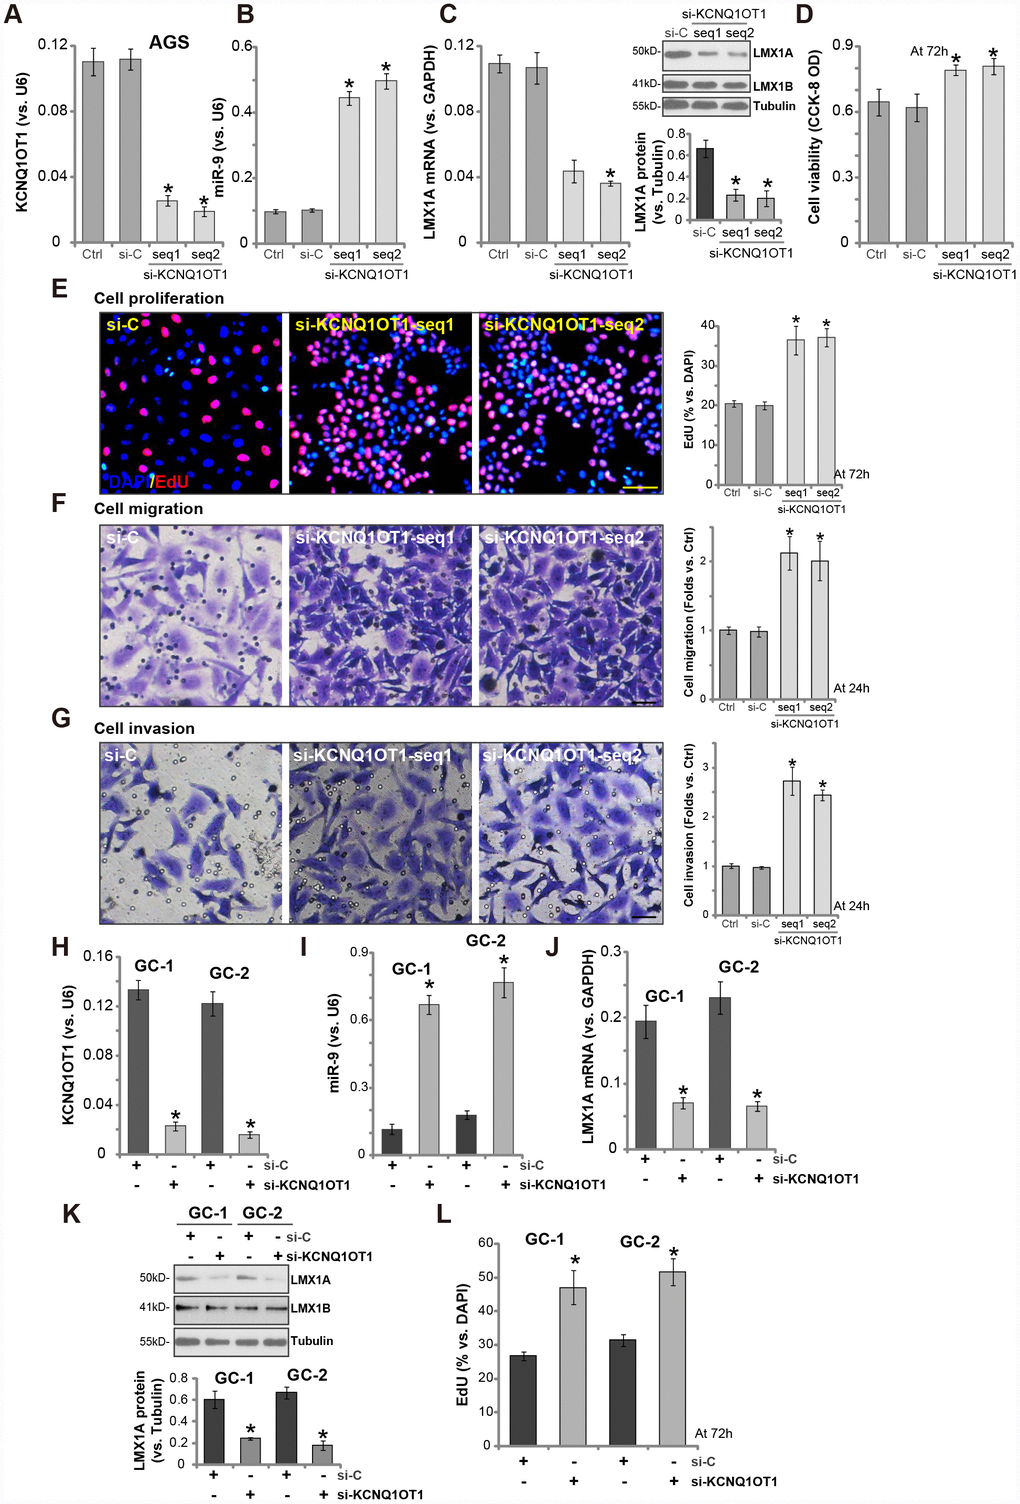 LncRNA KCNQ1OT1 siRNA induces miR-9 upregulation and LMX1A downregulation, promoting GC cell progression in vitro. AGS cells (A–G) or primary human GC cells (“GC-1/GC-2”) (H–L) were transfected with 500 nM of KCNQ1OT1 siRNA (“seq1/seq2”, two rounds, total 48h) or the scramble control siRNA (“si-C”, two rounds, total 48h), expression of KCNQ1OT1 (A and H), miR-9 (B and I) and LMX1A mRNA (C and J) were tested by qPCR assays; LMX1A and LMX1B protein expression was tested by Western blotting assay (C and K, LMX1A protein results were quantified); Cells were further cultured for the indicated time periods, cell viability (D) and proliferation (E and L) were tested by the listed assays; Cell migration and invasion were tested by “Transwell” (F) and “Matrigel Transwell” (G) assays respectively. For each assay, n=5. *P vs. “si-C” cells. Experiments in this figure were repeated three times, and similar results were obtained. Bar=100 μm (E–G).